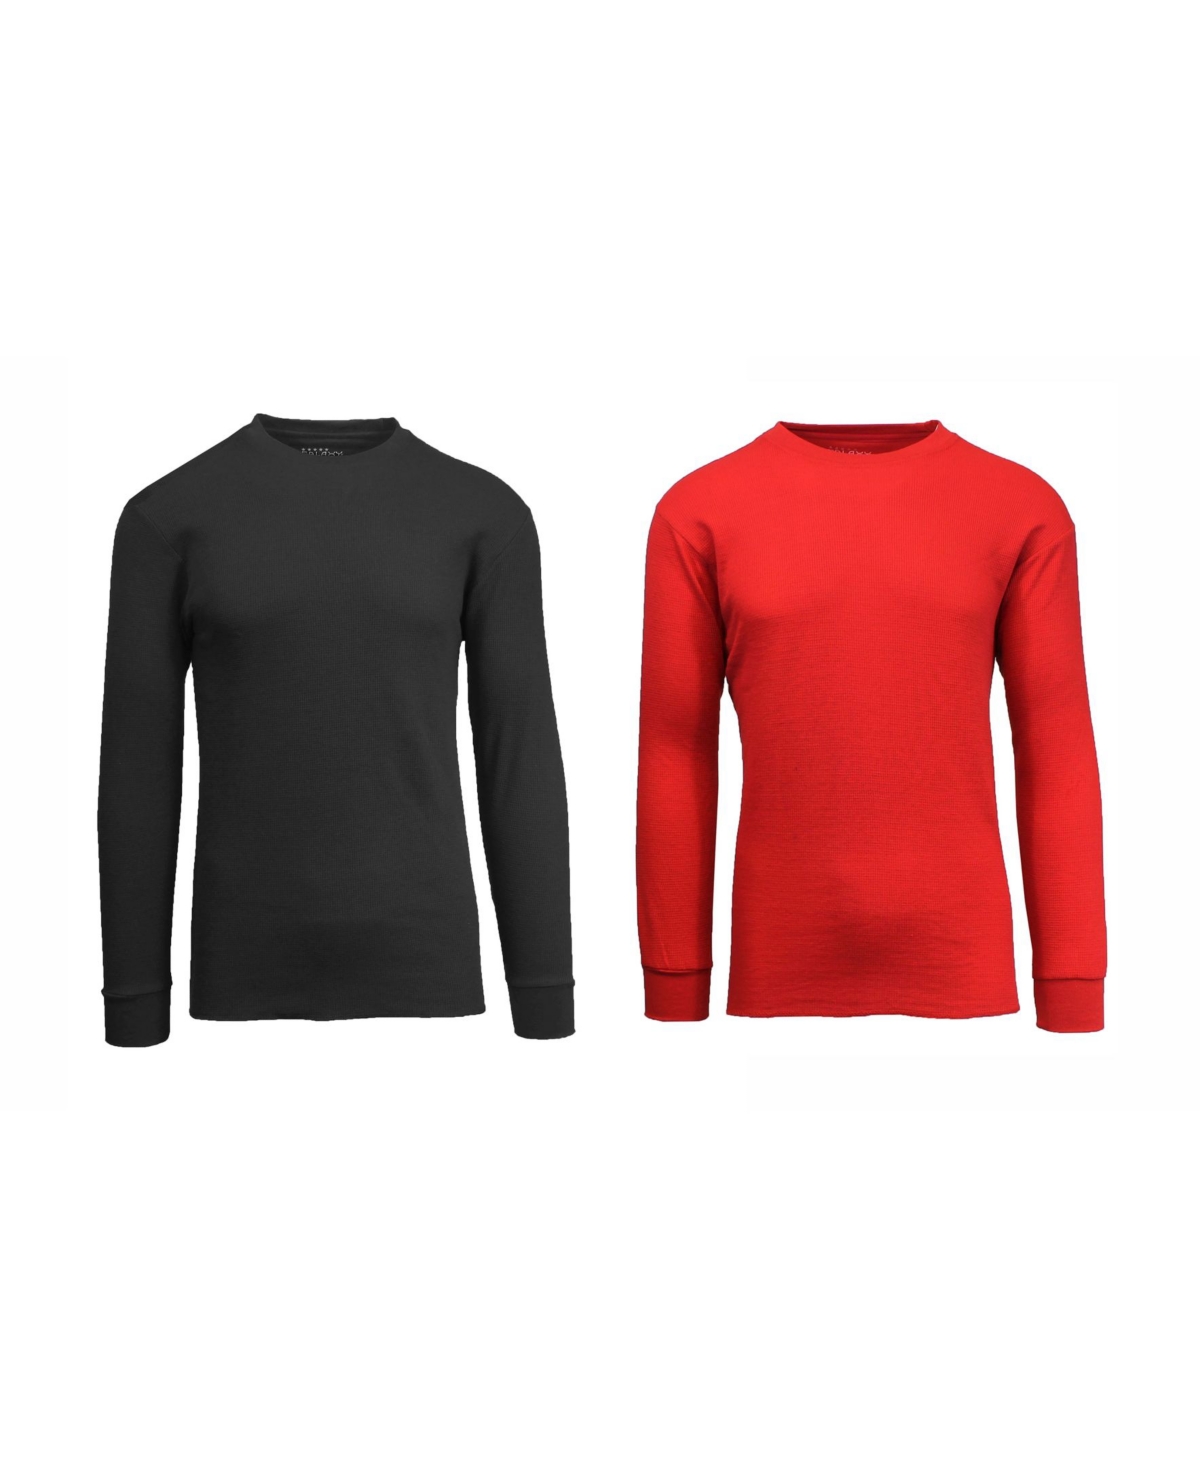 Men's Waffle Knit Thermal Shirt, Pack of 2 - Multi